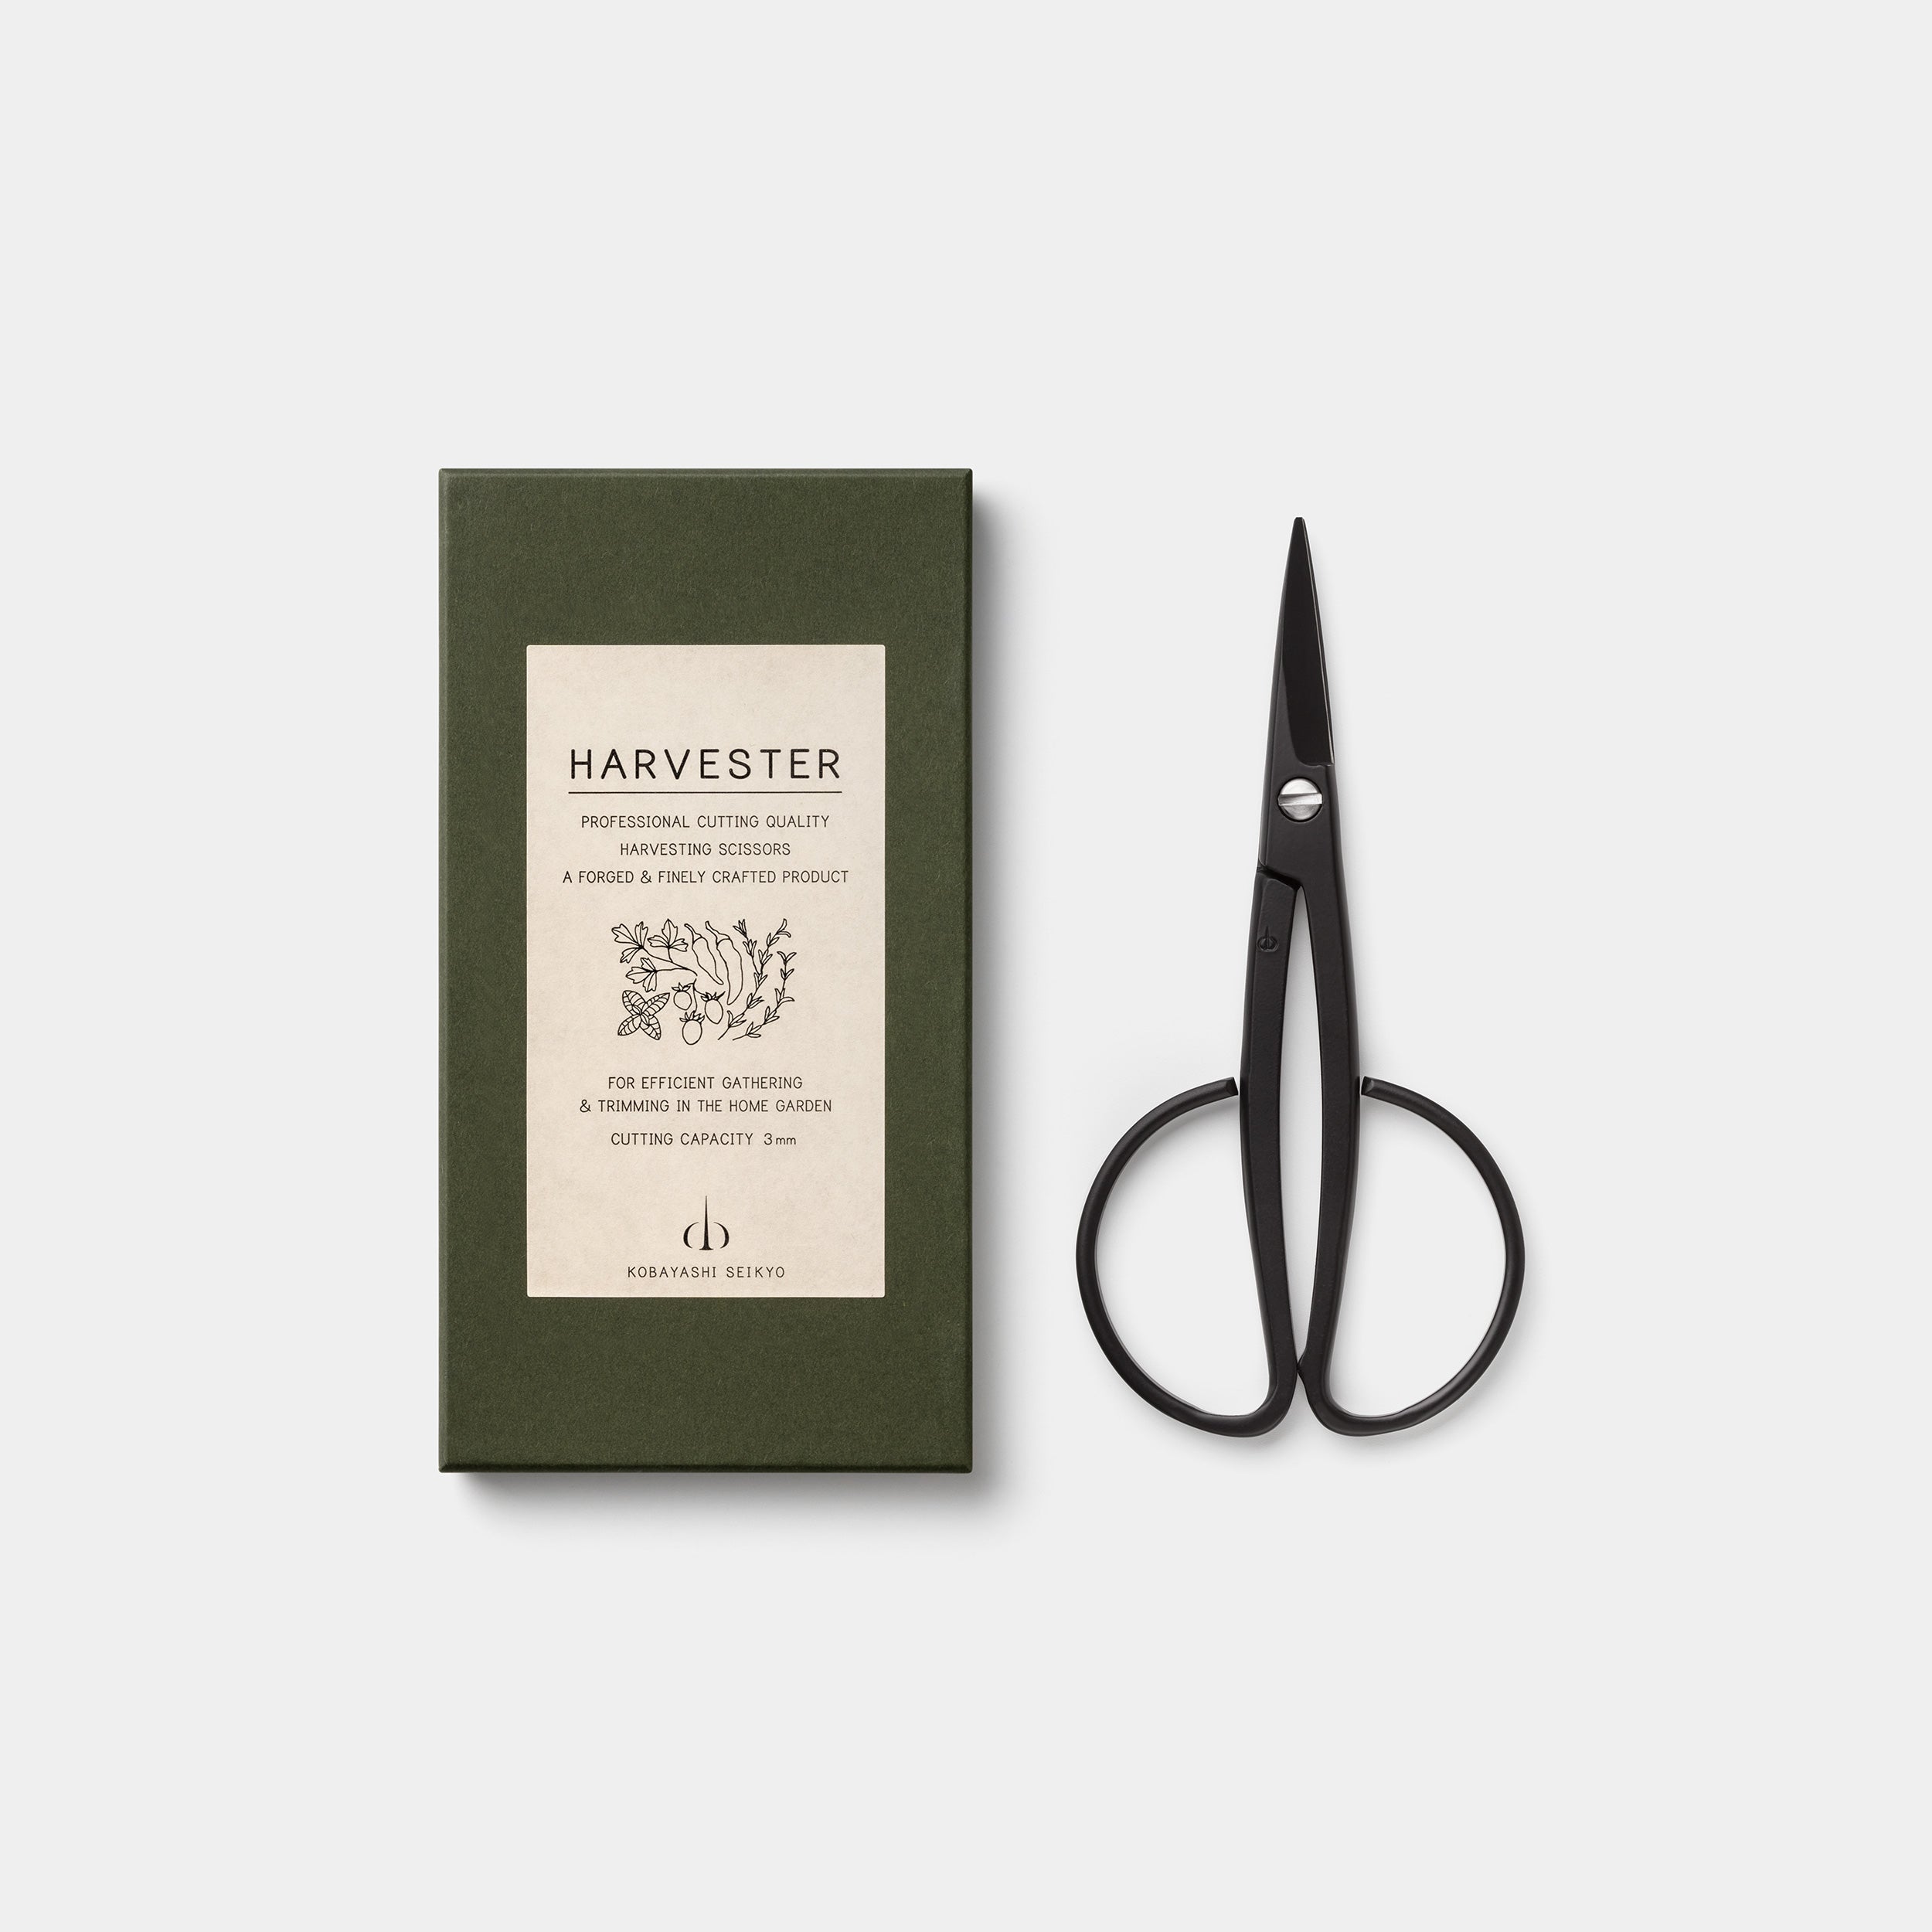 Kobayashi Harvester Scissors from Top with Box